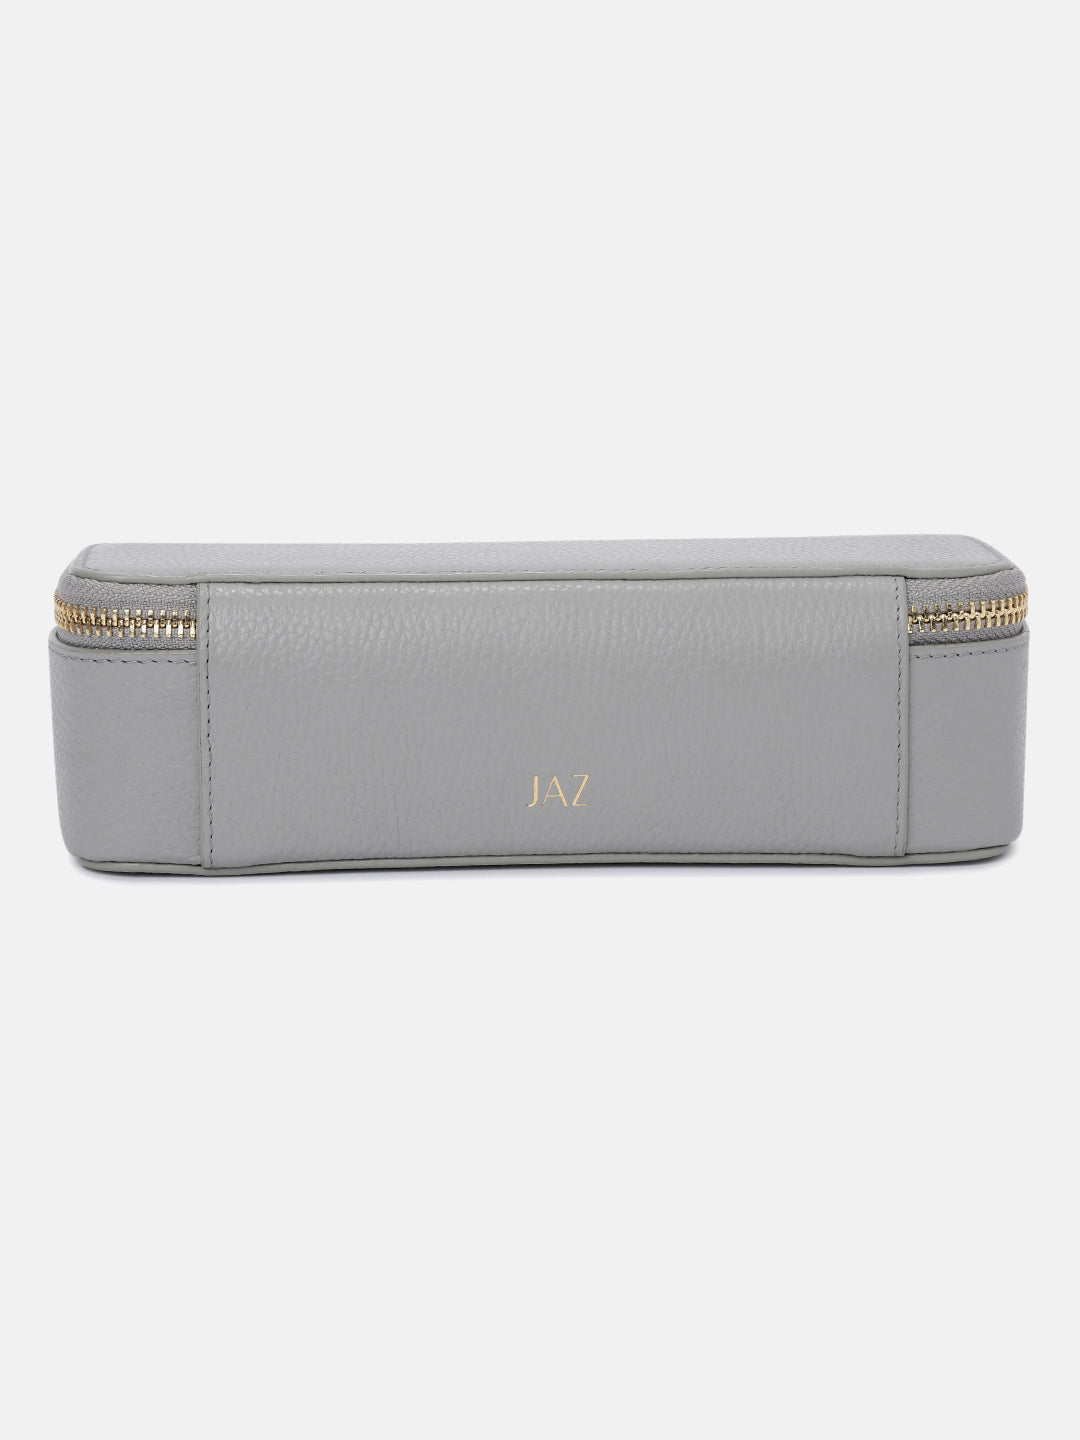 Pennelli Cosmetic Case - Grey